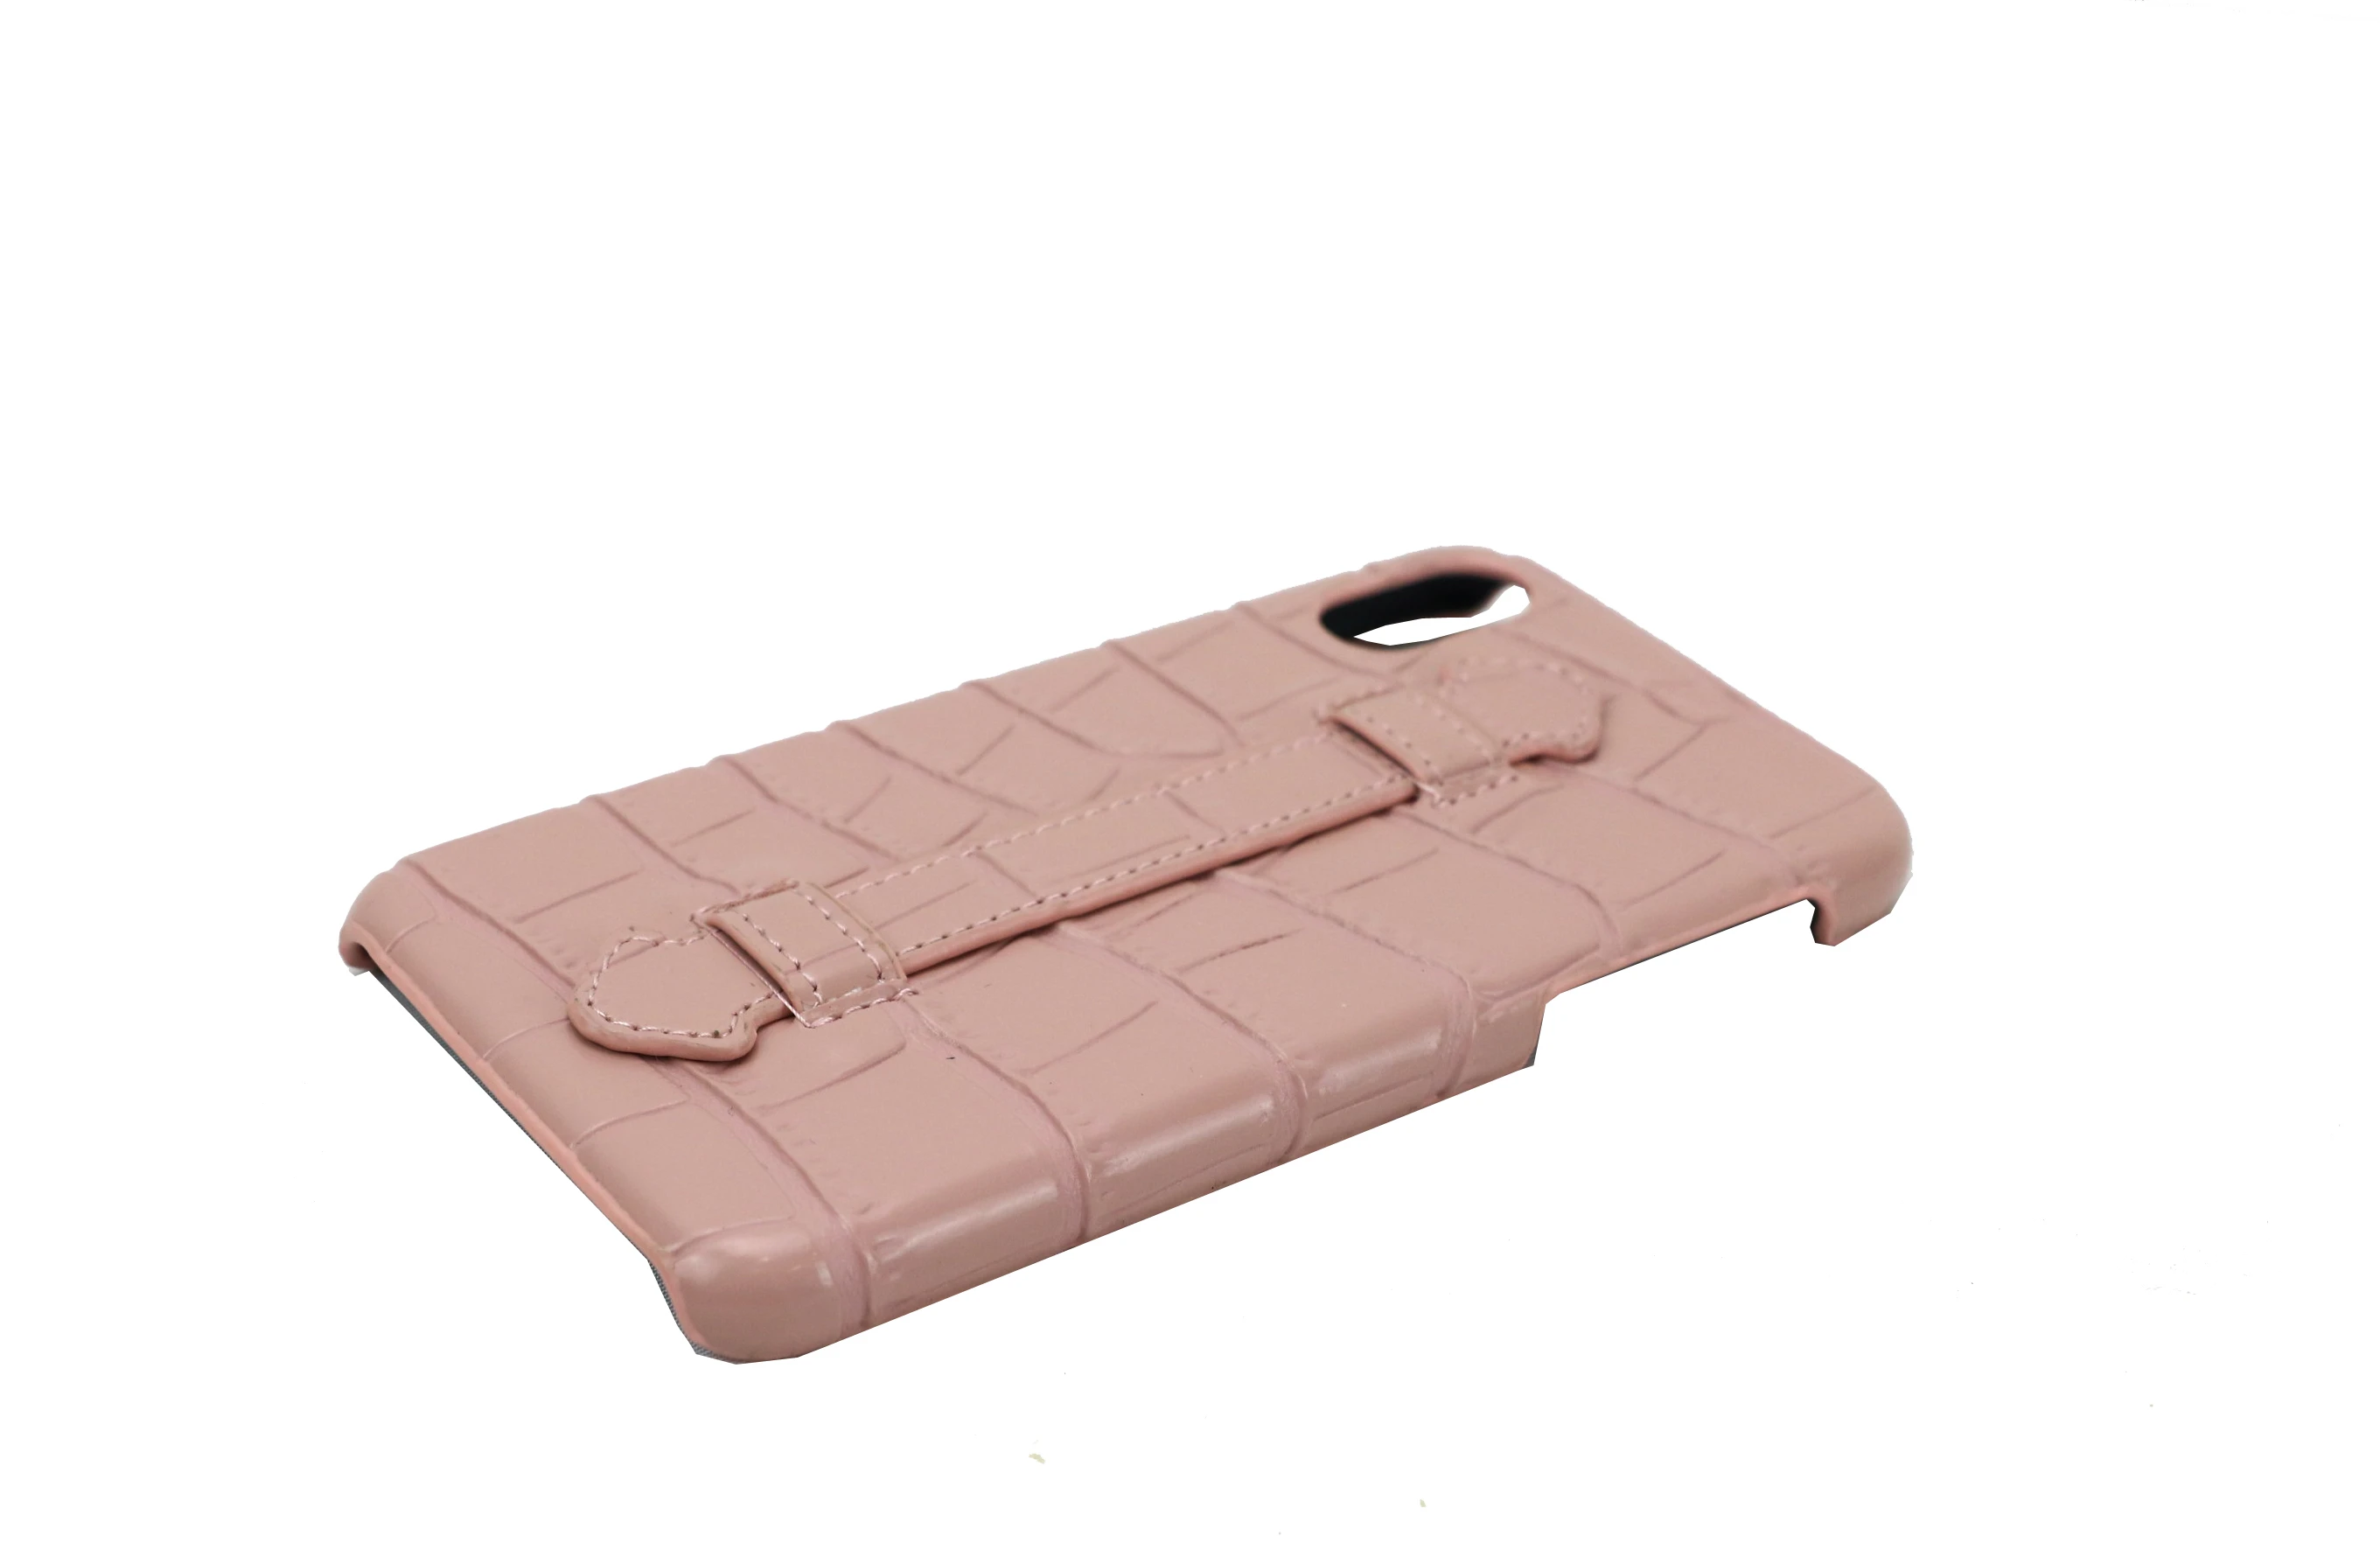 emboss PU crocodile leather hand strap phone cover case for Iphone Xs